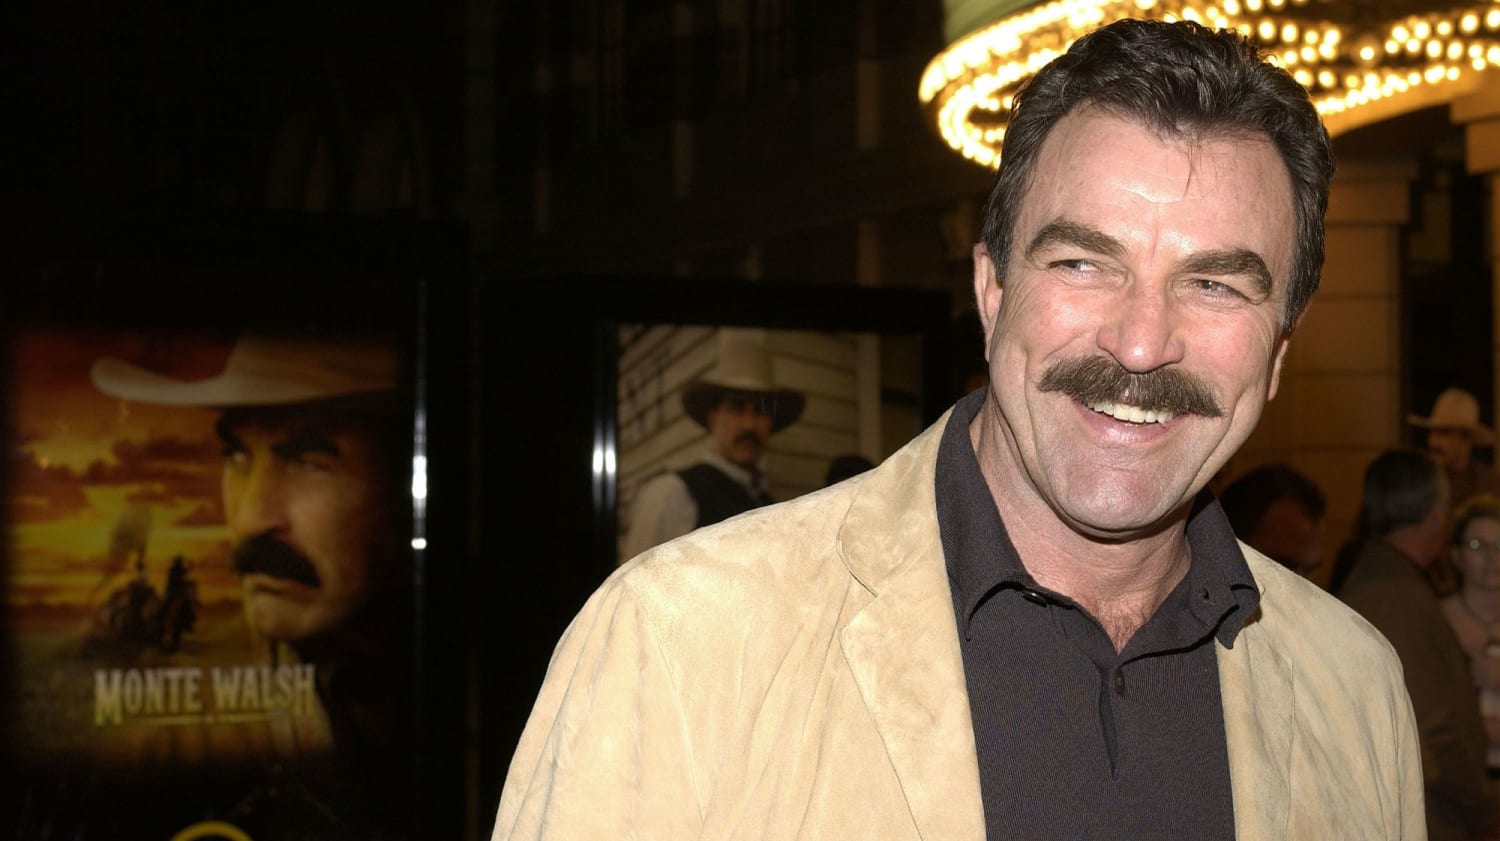 8 Facts About Tom Selleck On His 75th Birthday